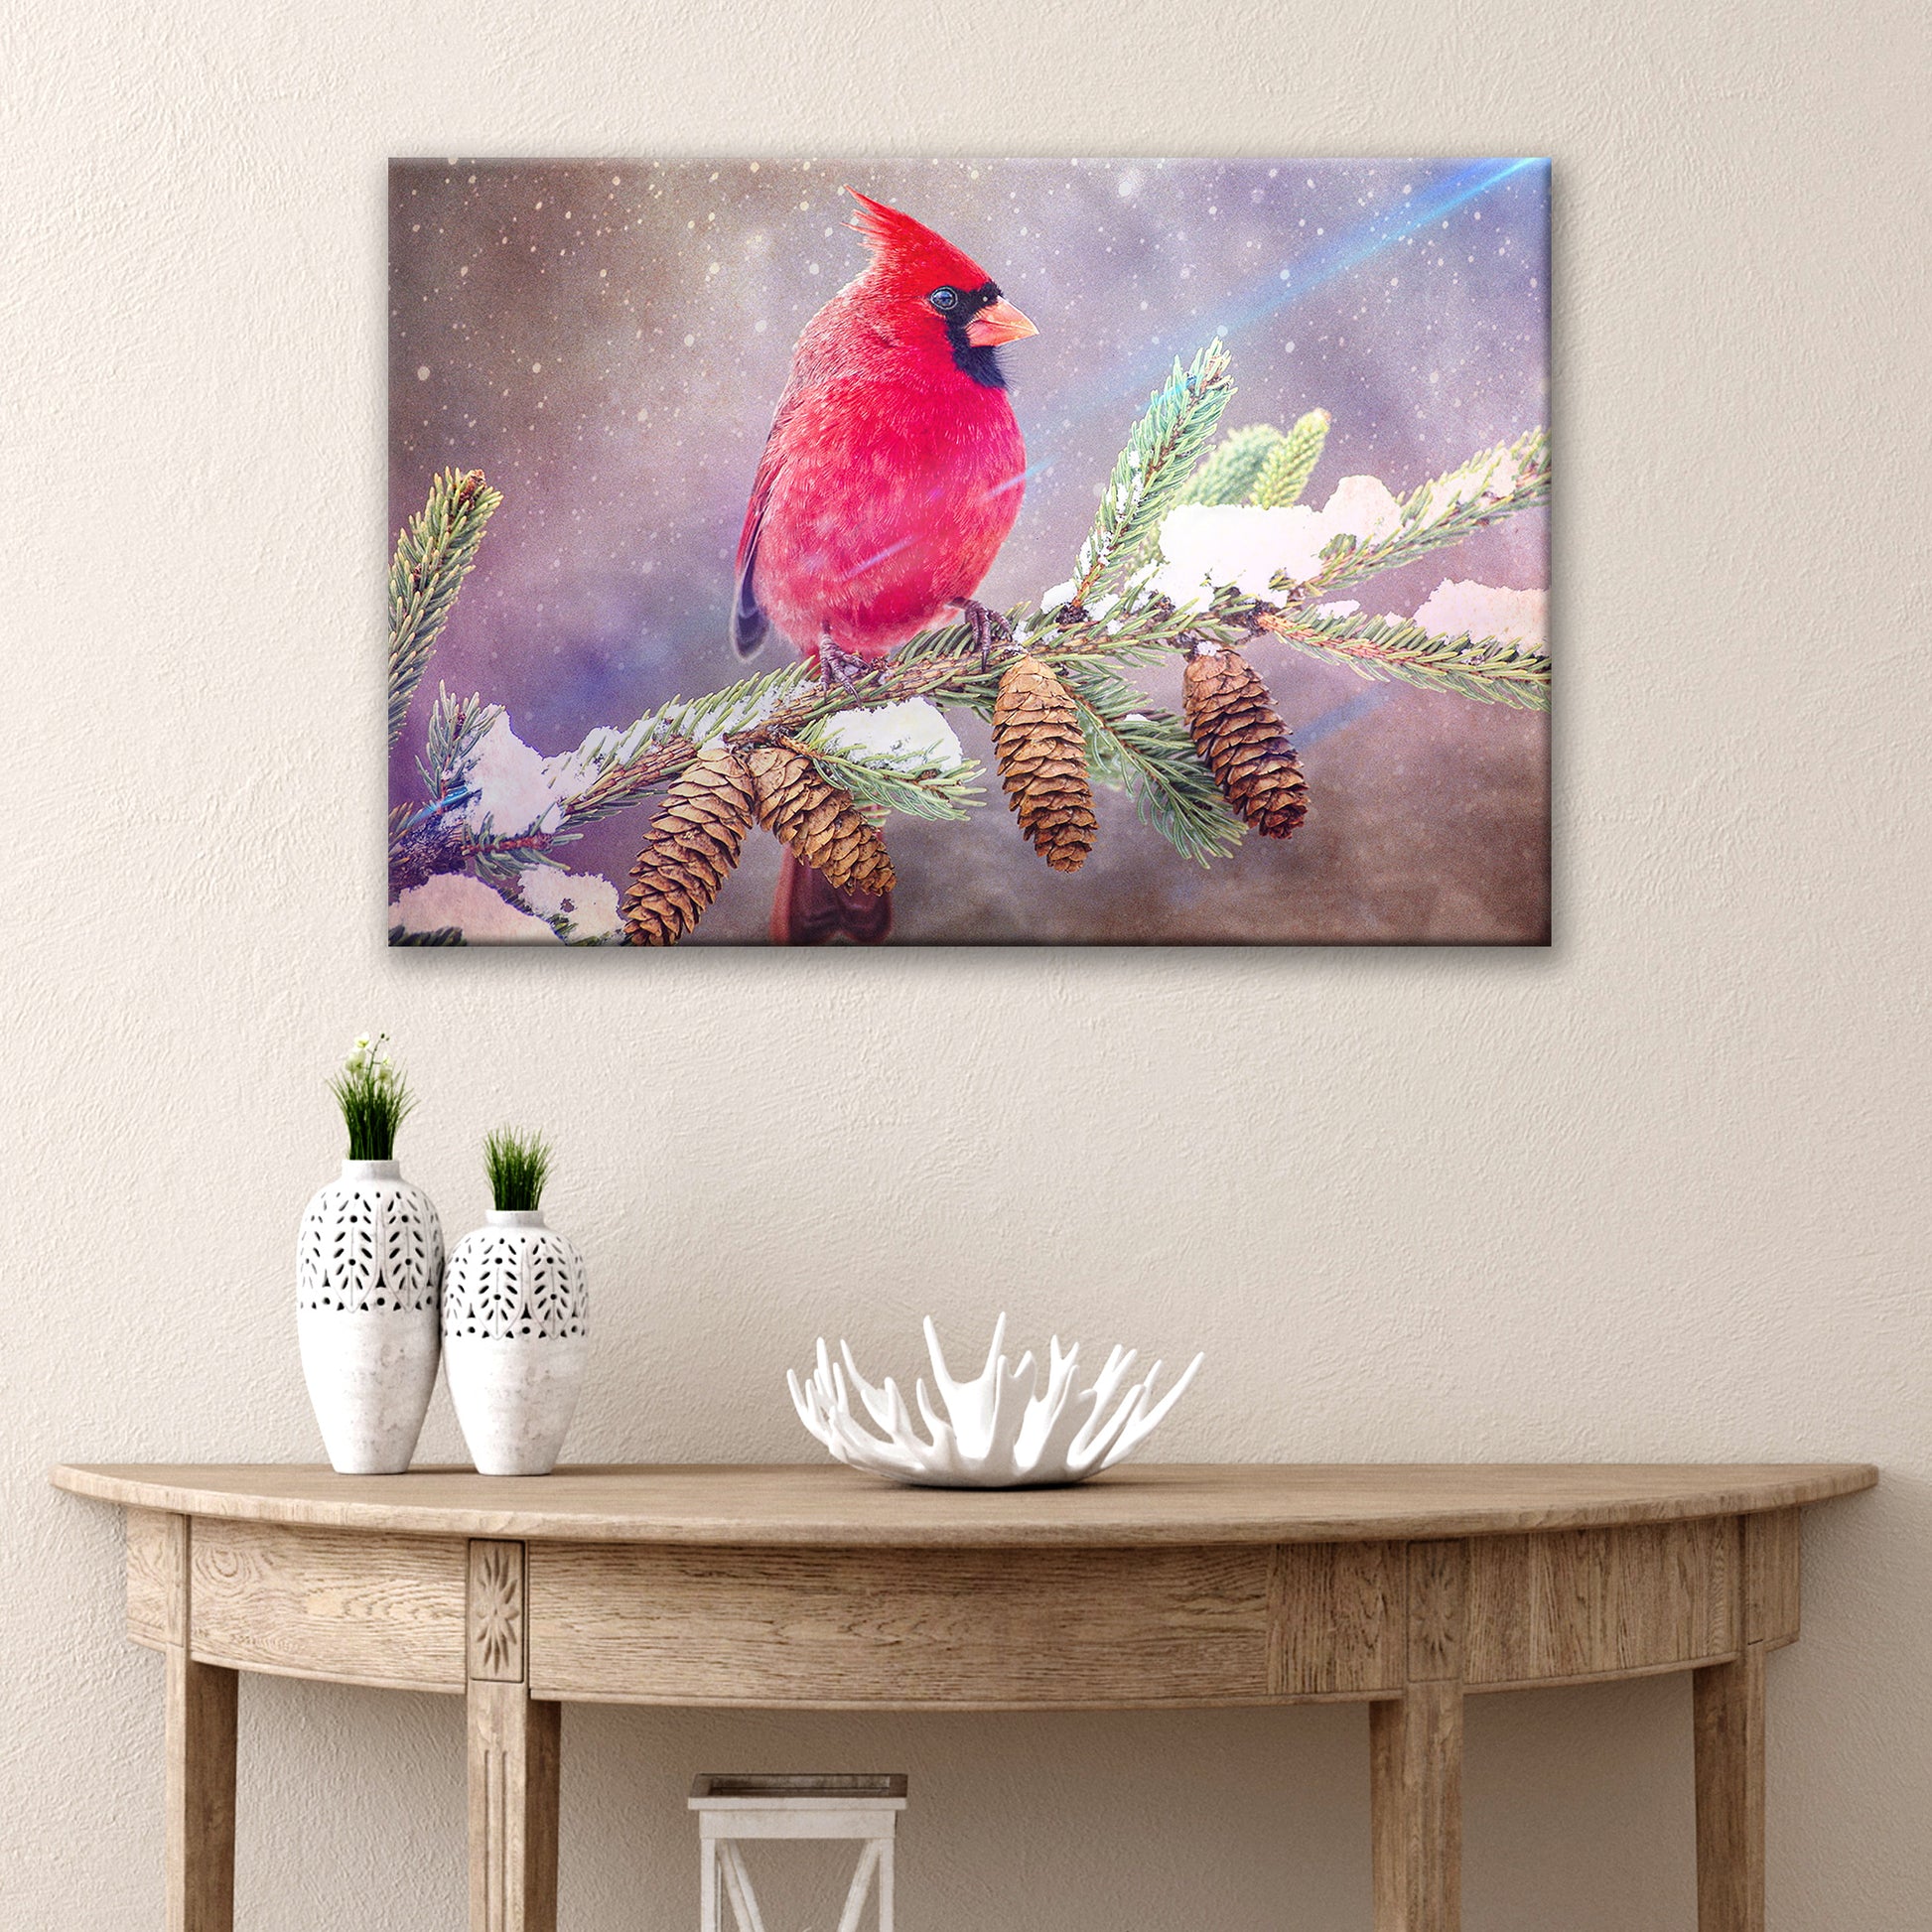 Winter Red Cardinal Canvas Wall Art - Image by Tailored Canvases